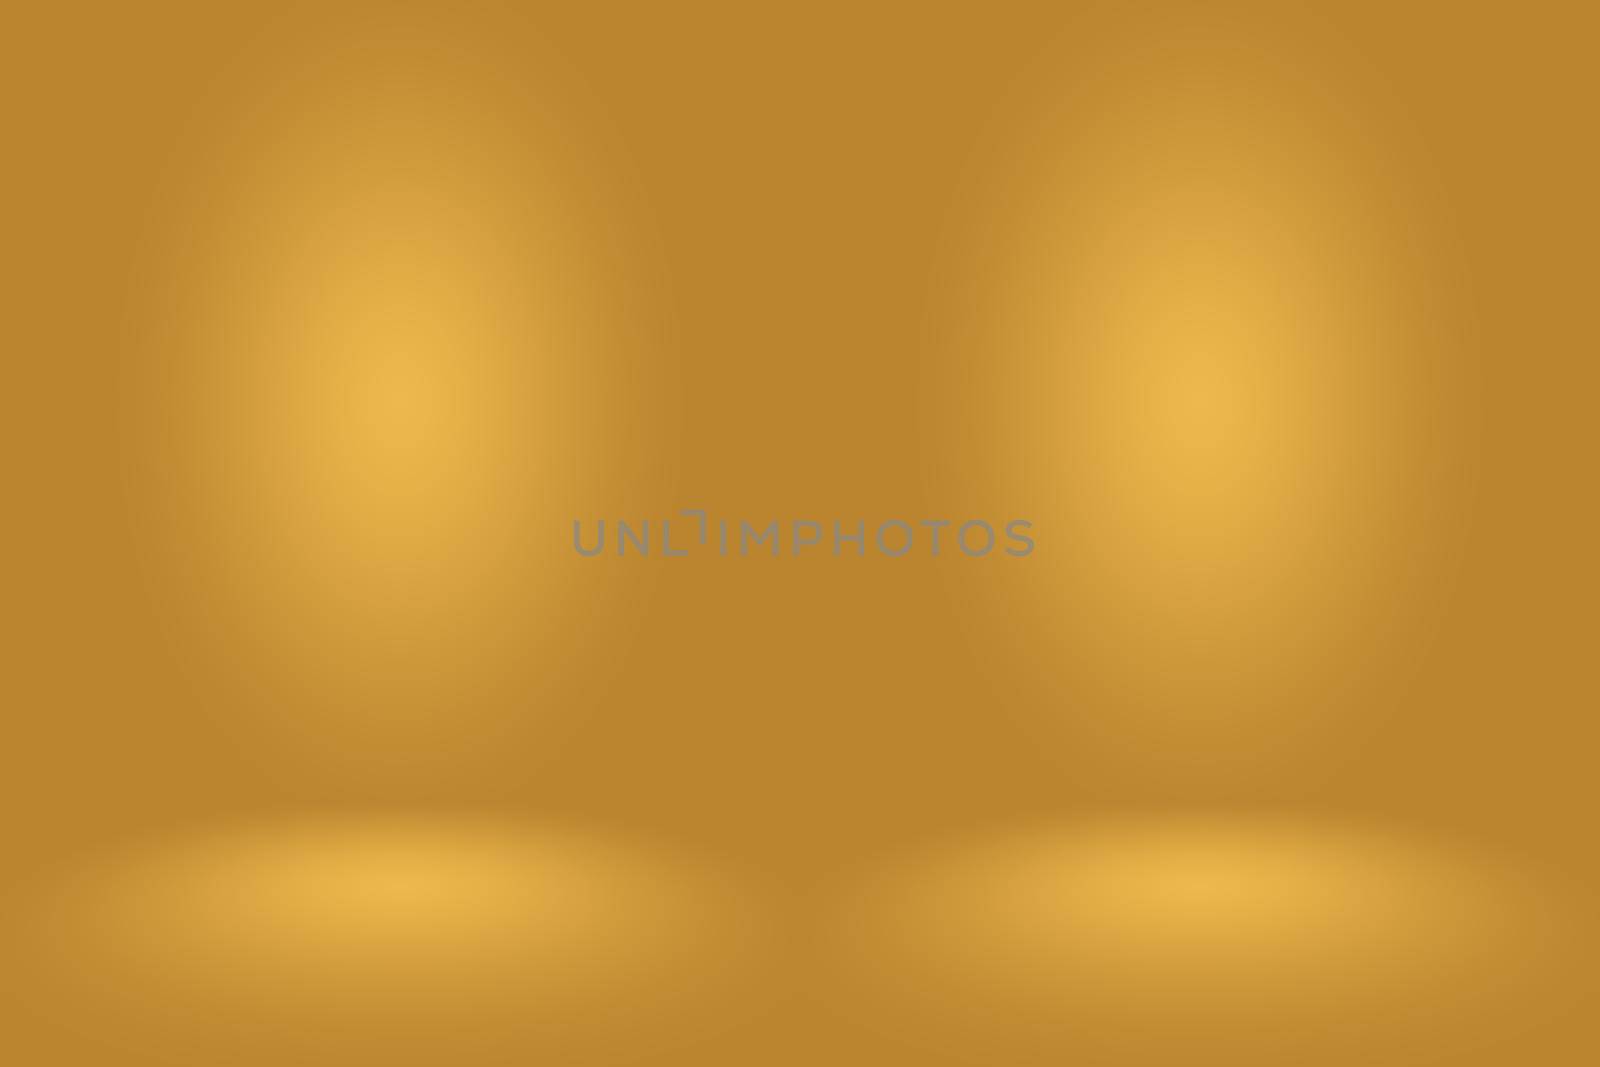 Abstract Luxury Gold Studio well use as background,layout and presentation